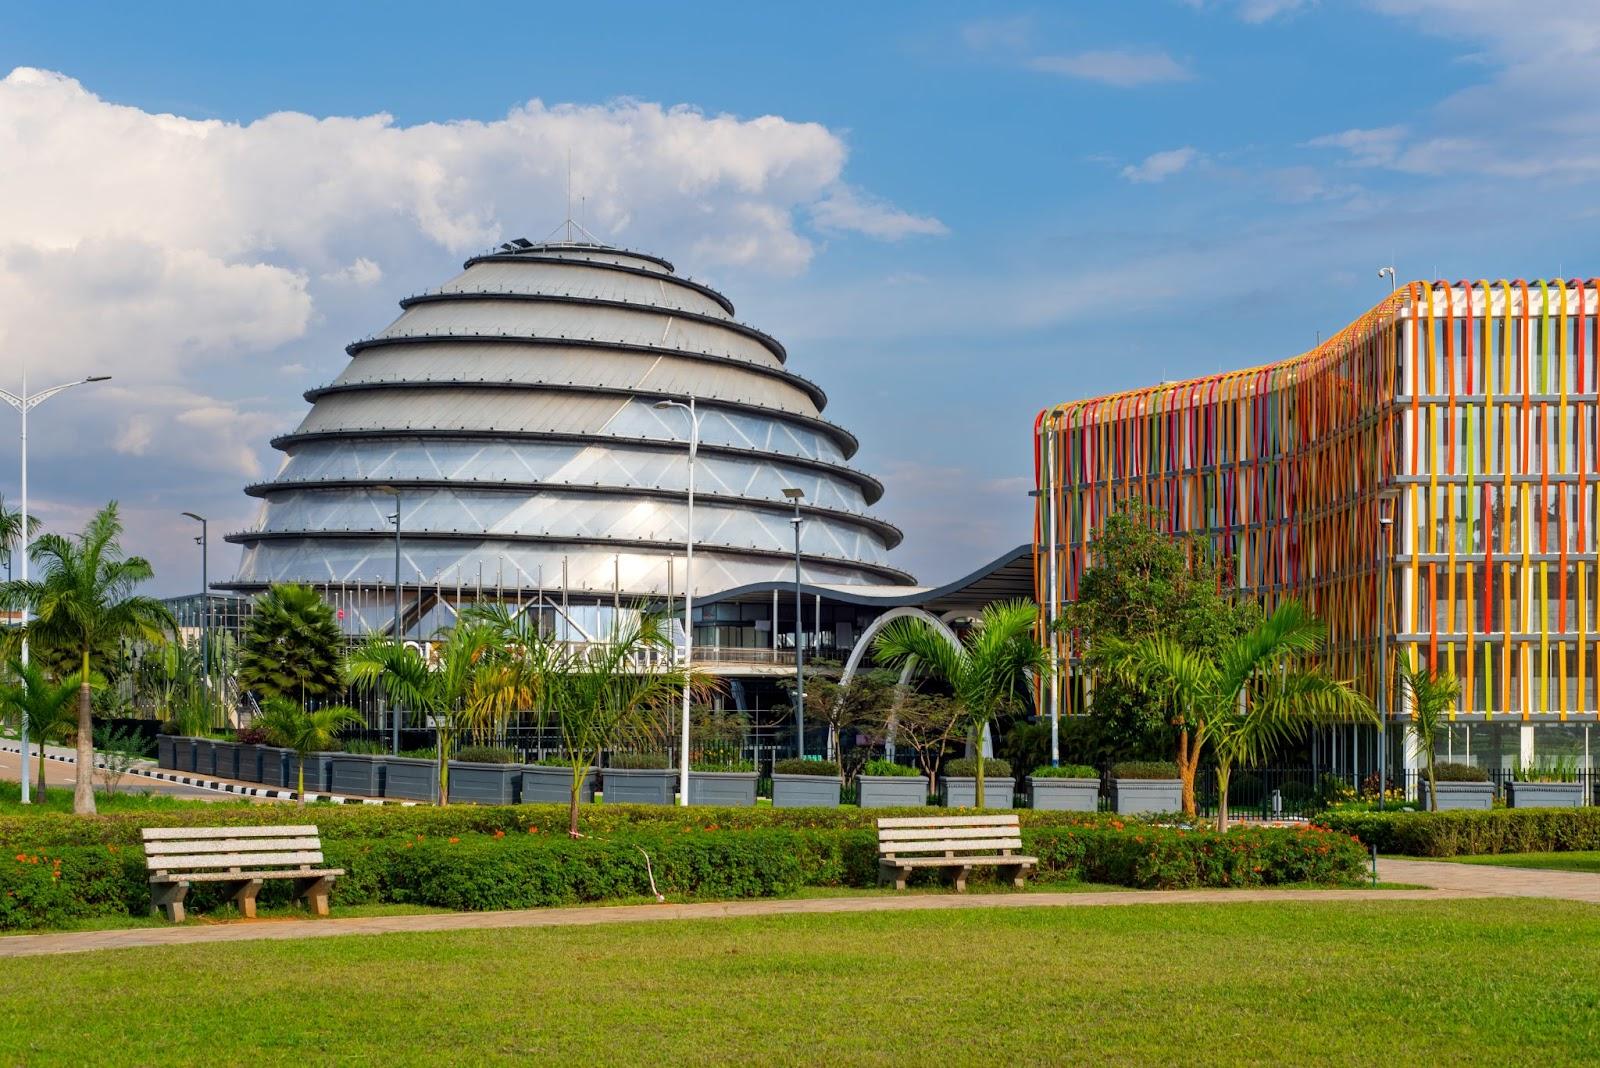 Kigali Convention Centre in Rwanda on a sunny day. 